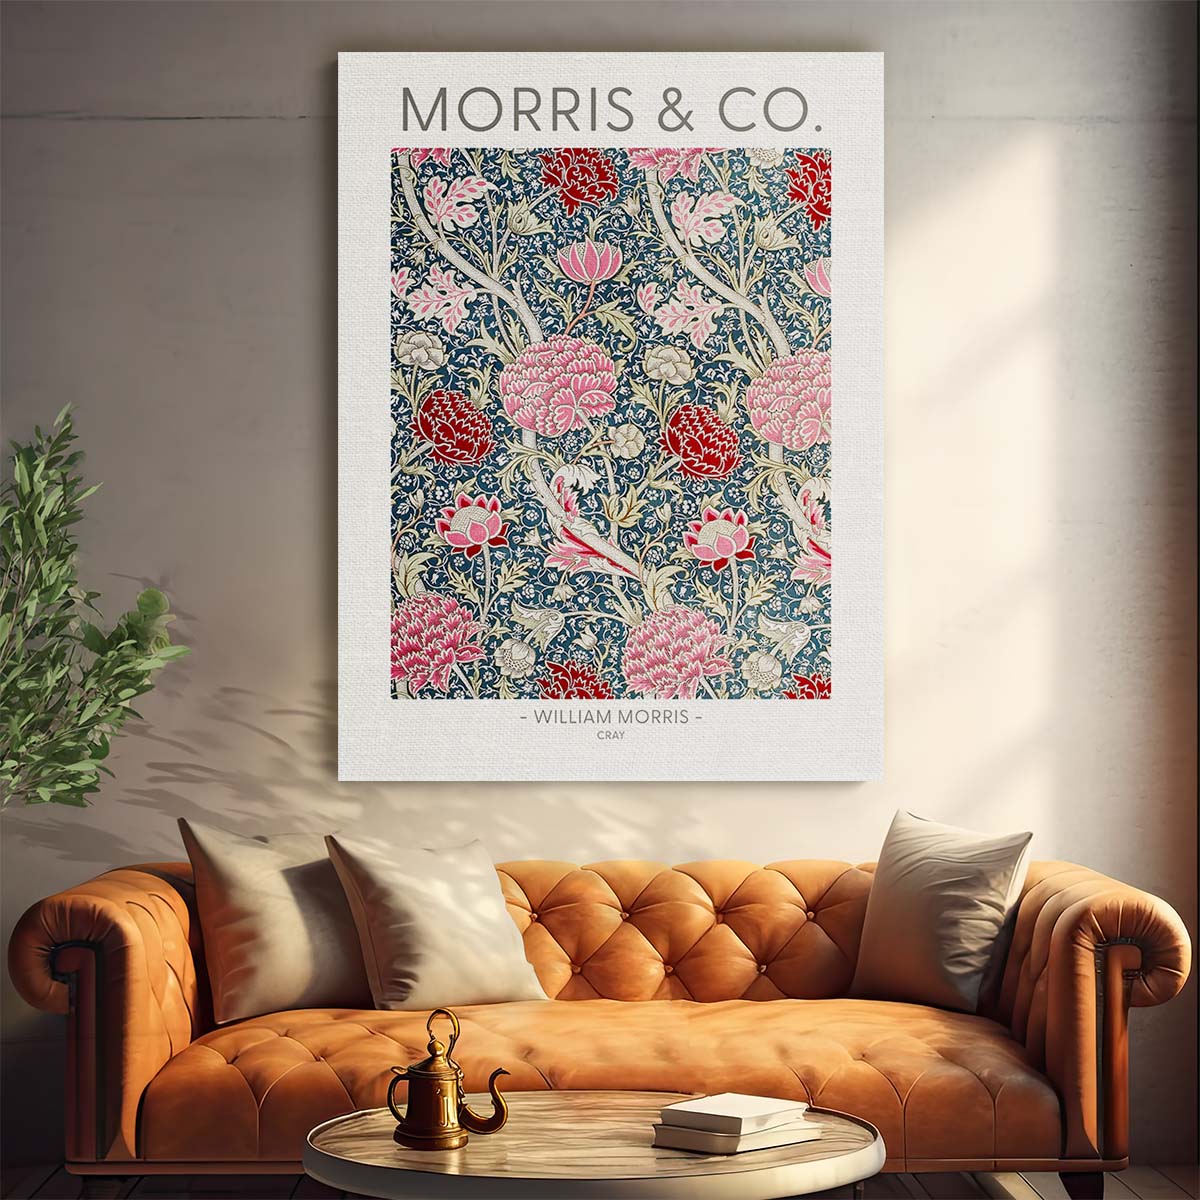 Vintage William Morris Floral Botanical Illustration Poster by Luxuriance Designs, made in USA